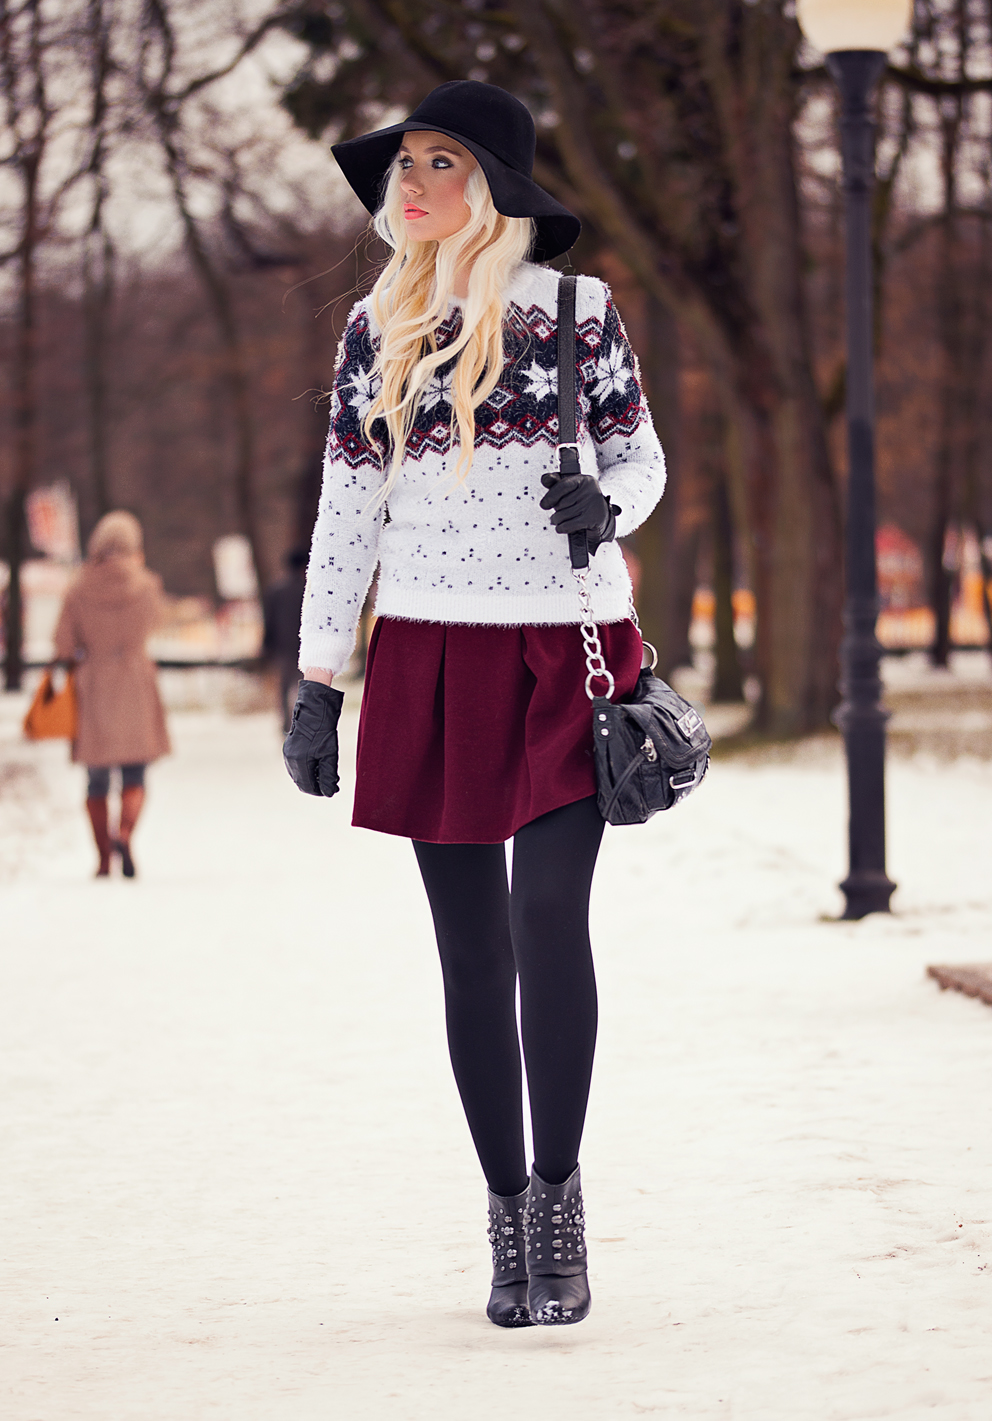 16 Stylish Ways to Wear a Skater Skirt This Winter